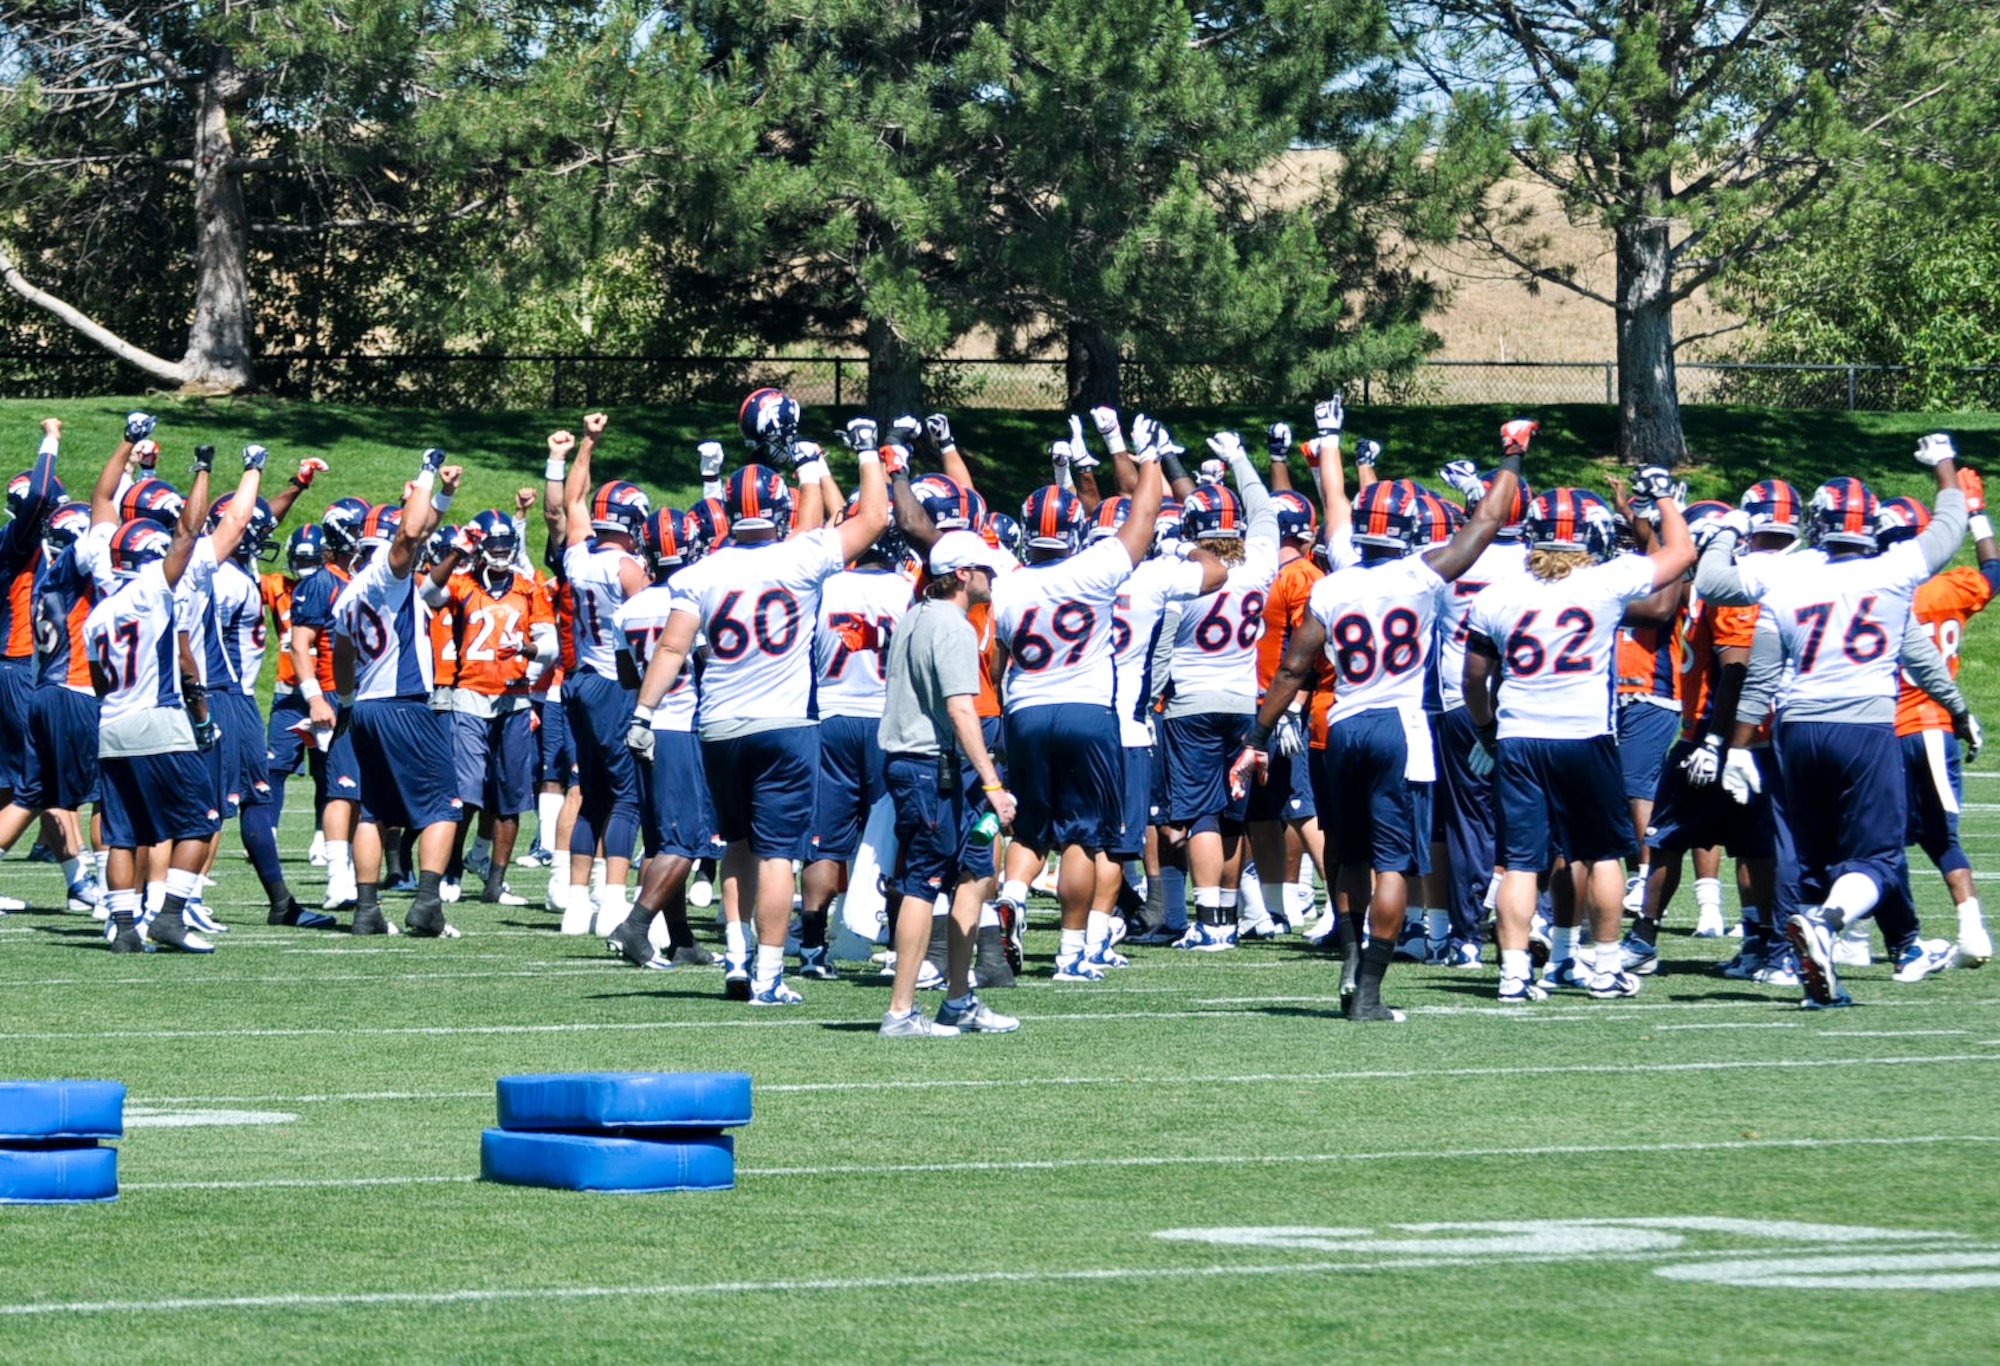 ENGLEWOOD, Colo. – Denver Bronco players huddle during a mini-camp session June 13, 2012. Benjamin Garland, a member of the Broncos and 140 Wing Public Affairs Office, Colorado Air National Guard, received an offer from the Broncos after graduating with the Air Force Academy Class of 2010. (U.S. Air Force photo by Senior Airman Christopher Gross)